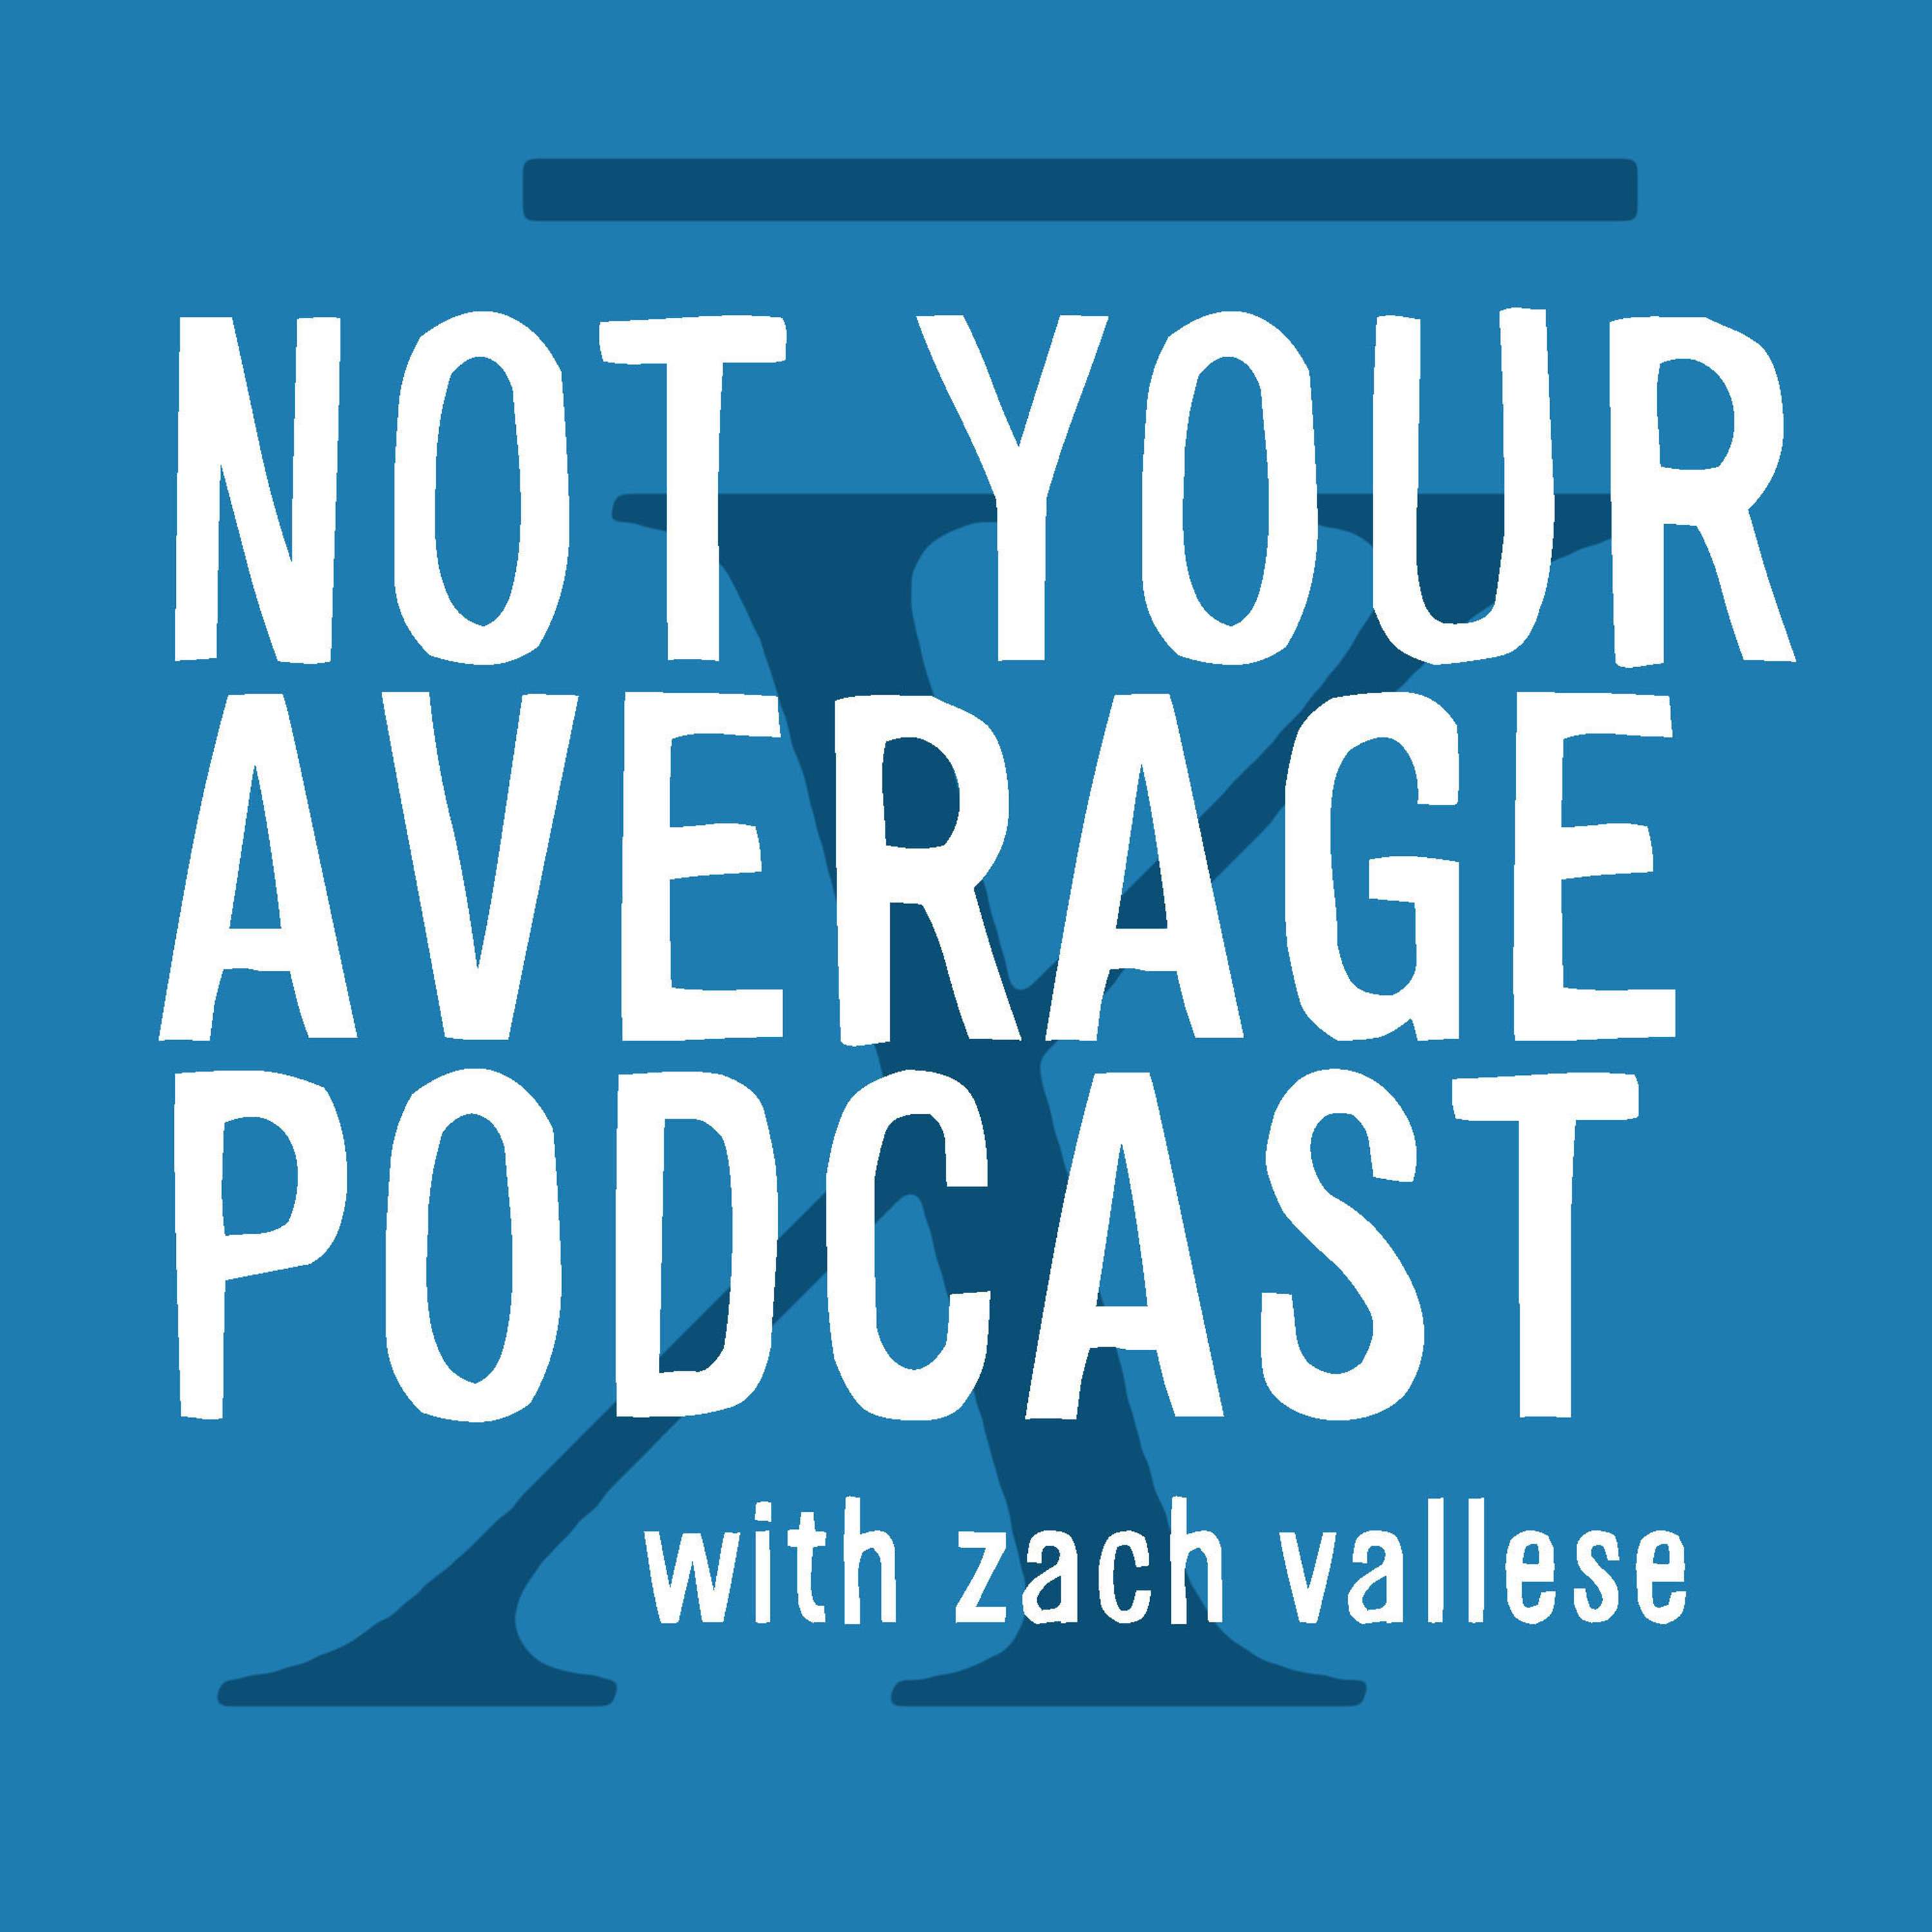 Not Your Average Podcast with Zach Vallese